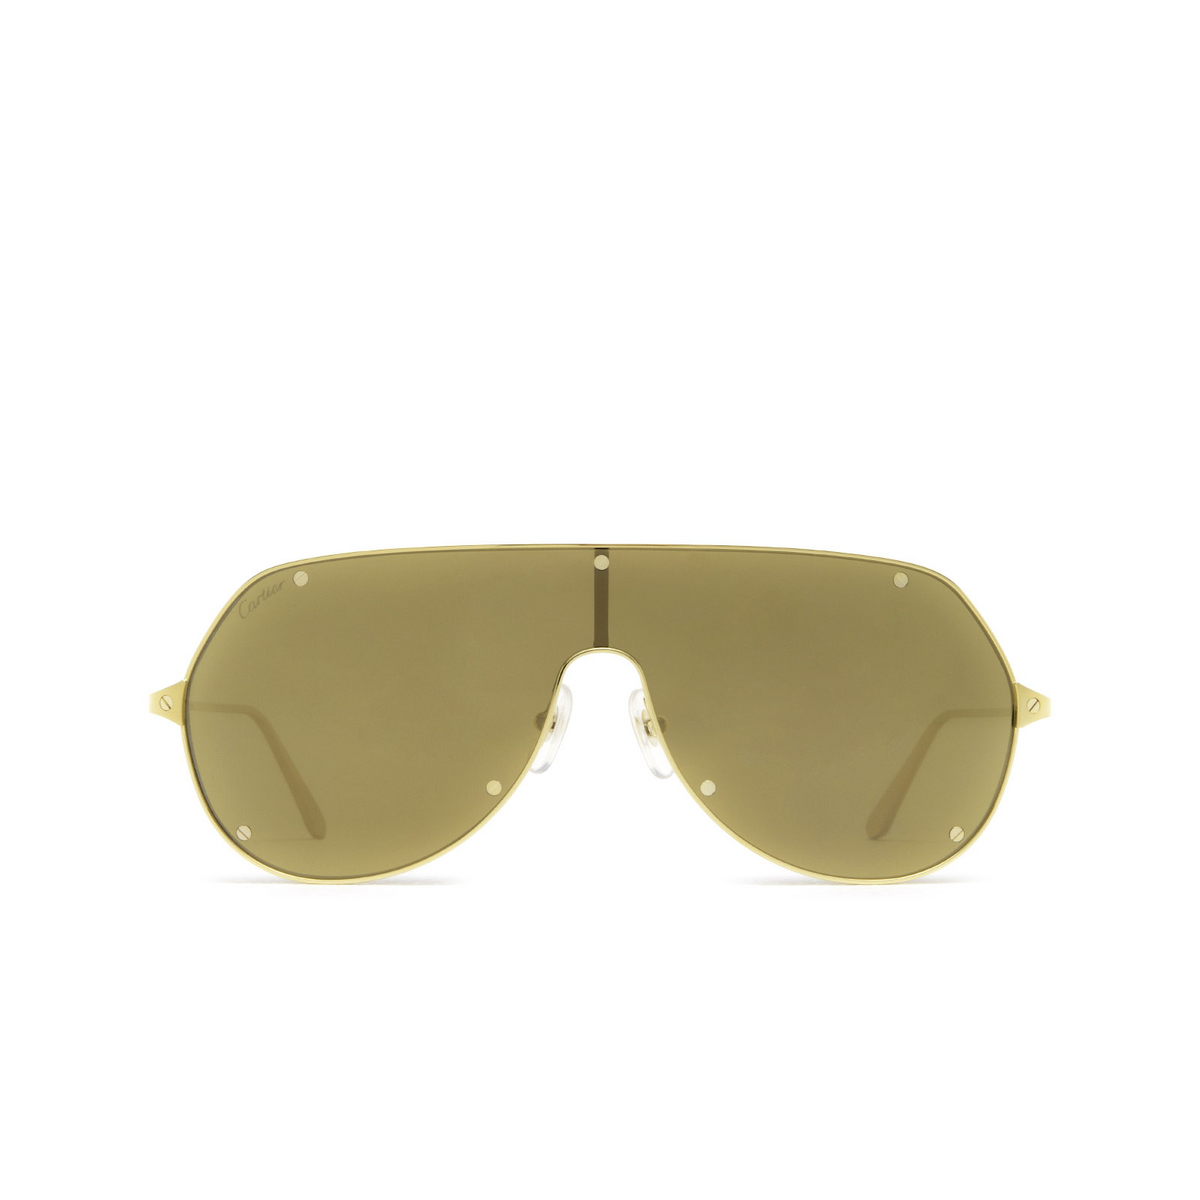 Cartier® Mask Sunglasses: CT0324S color Gold 003 - front view.